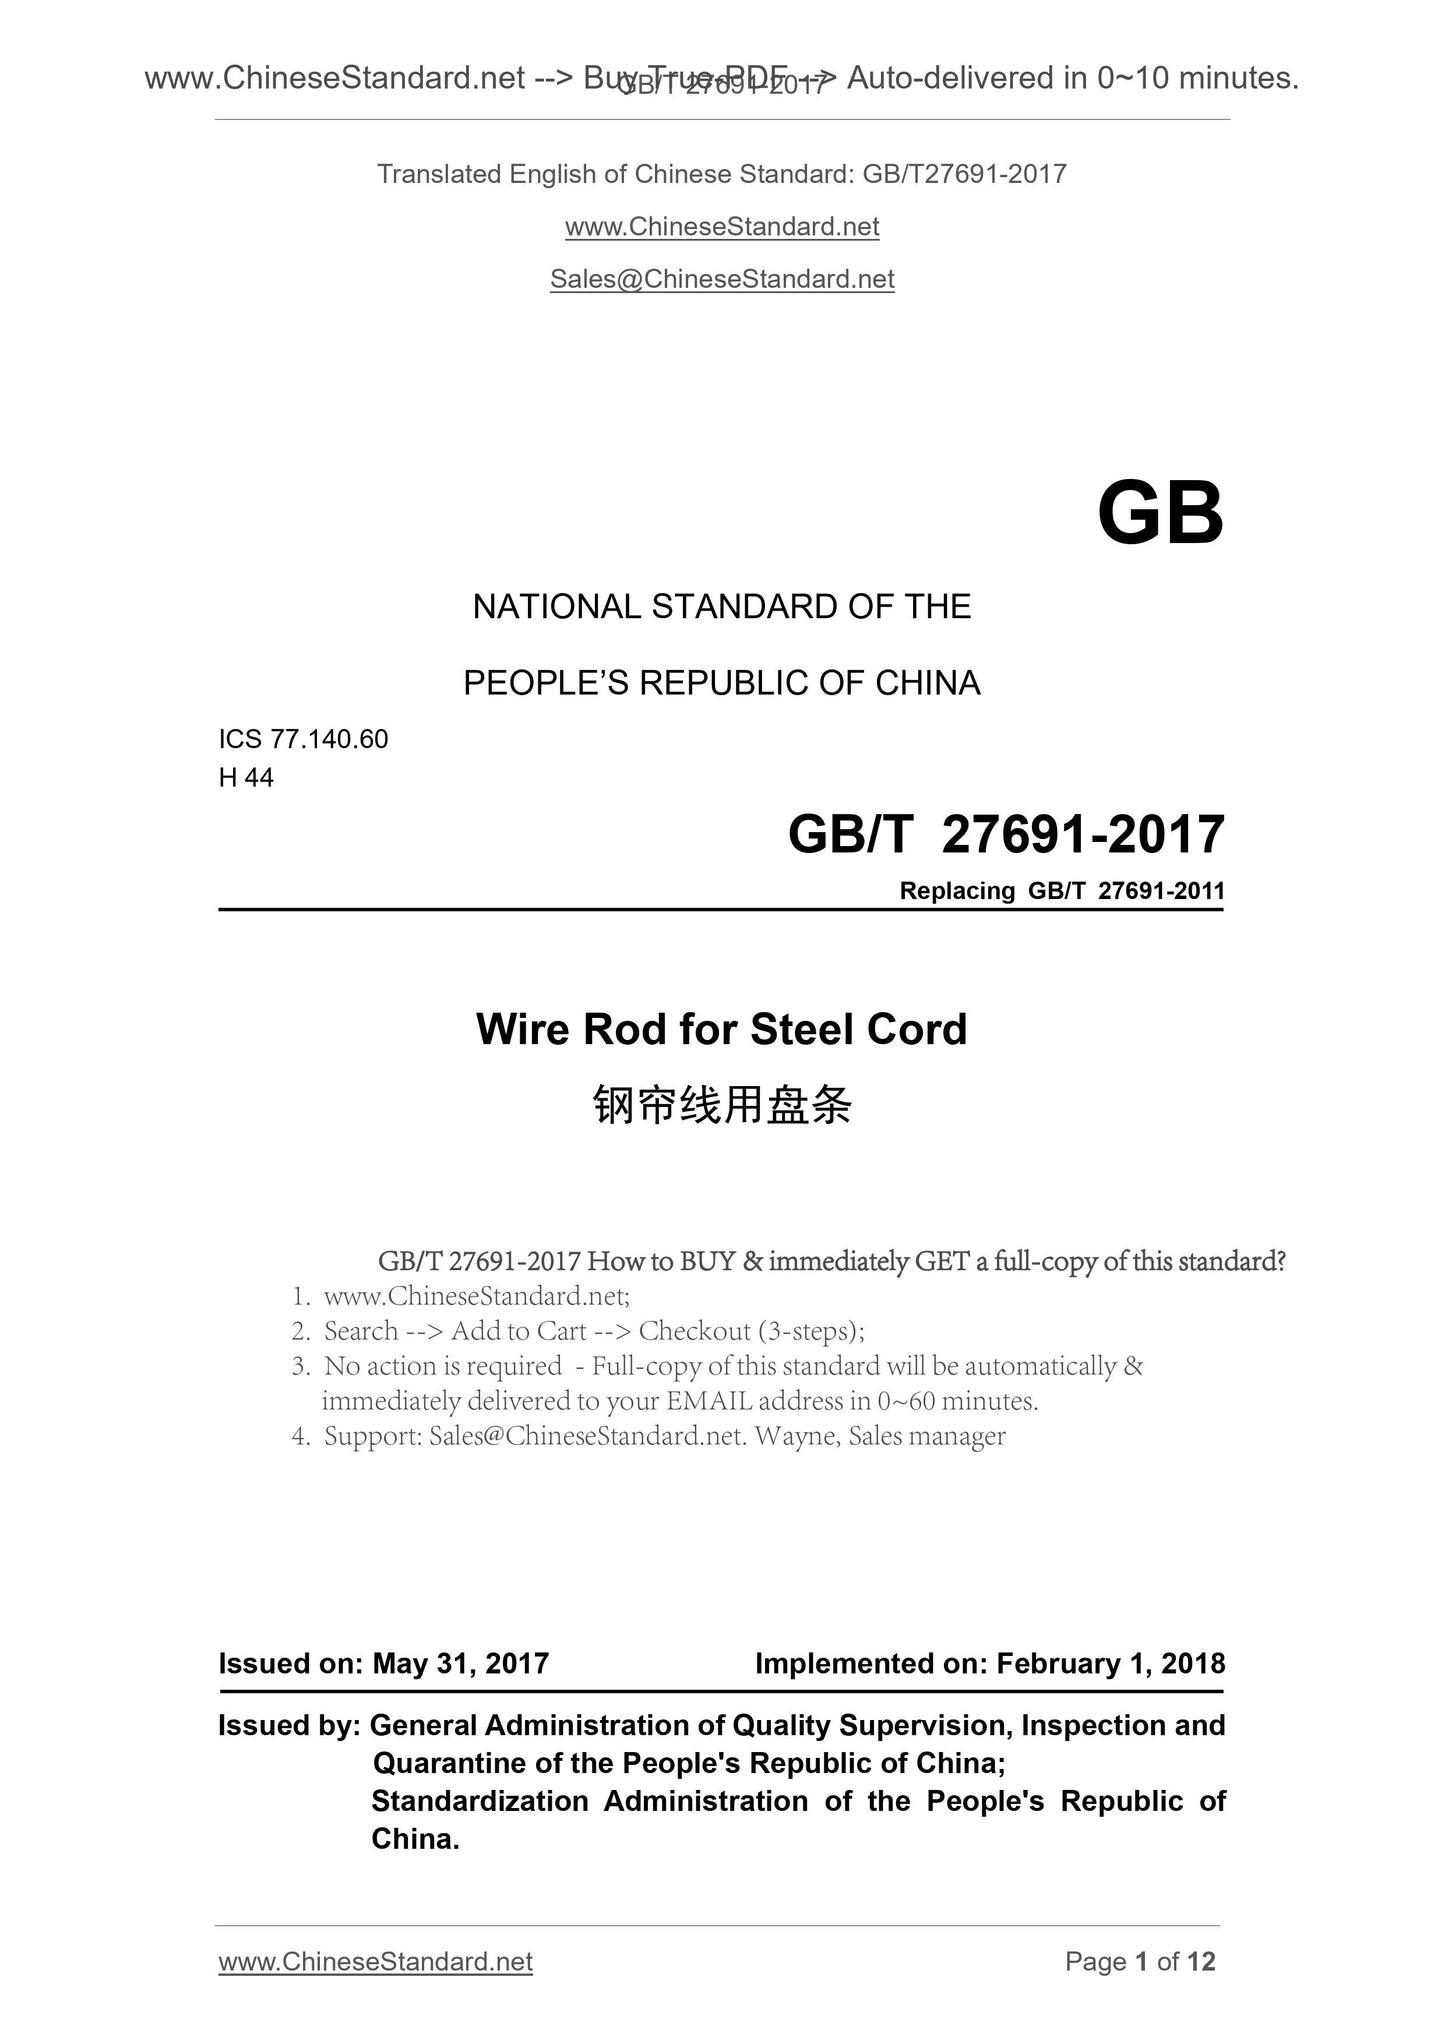 GB/T 27691-2017 Page 1